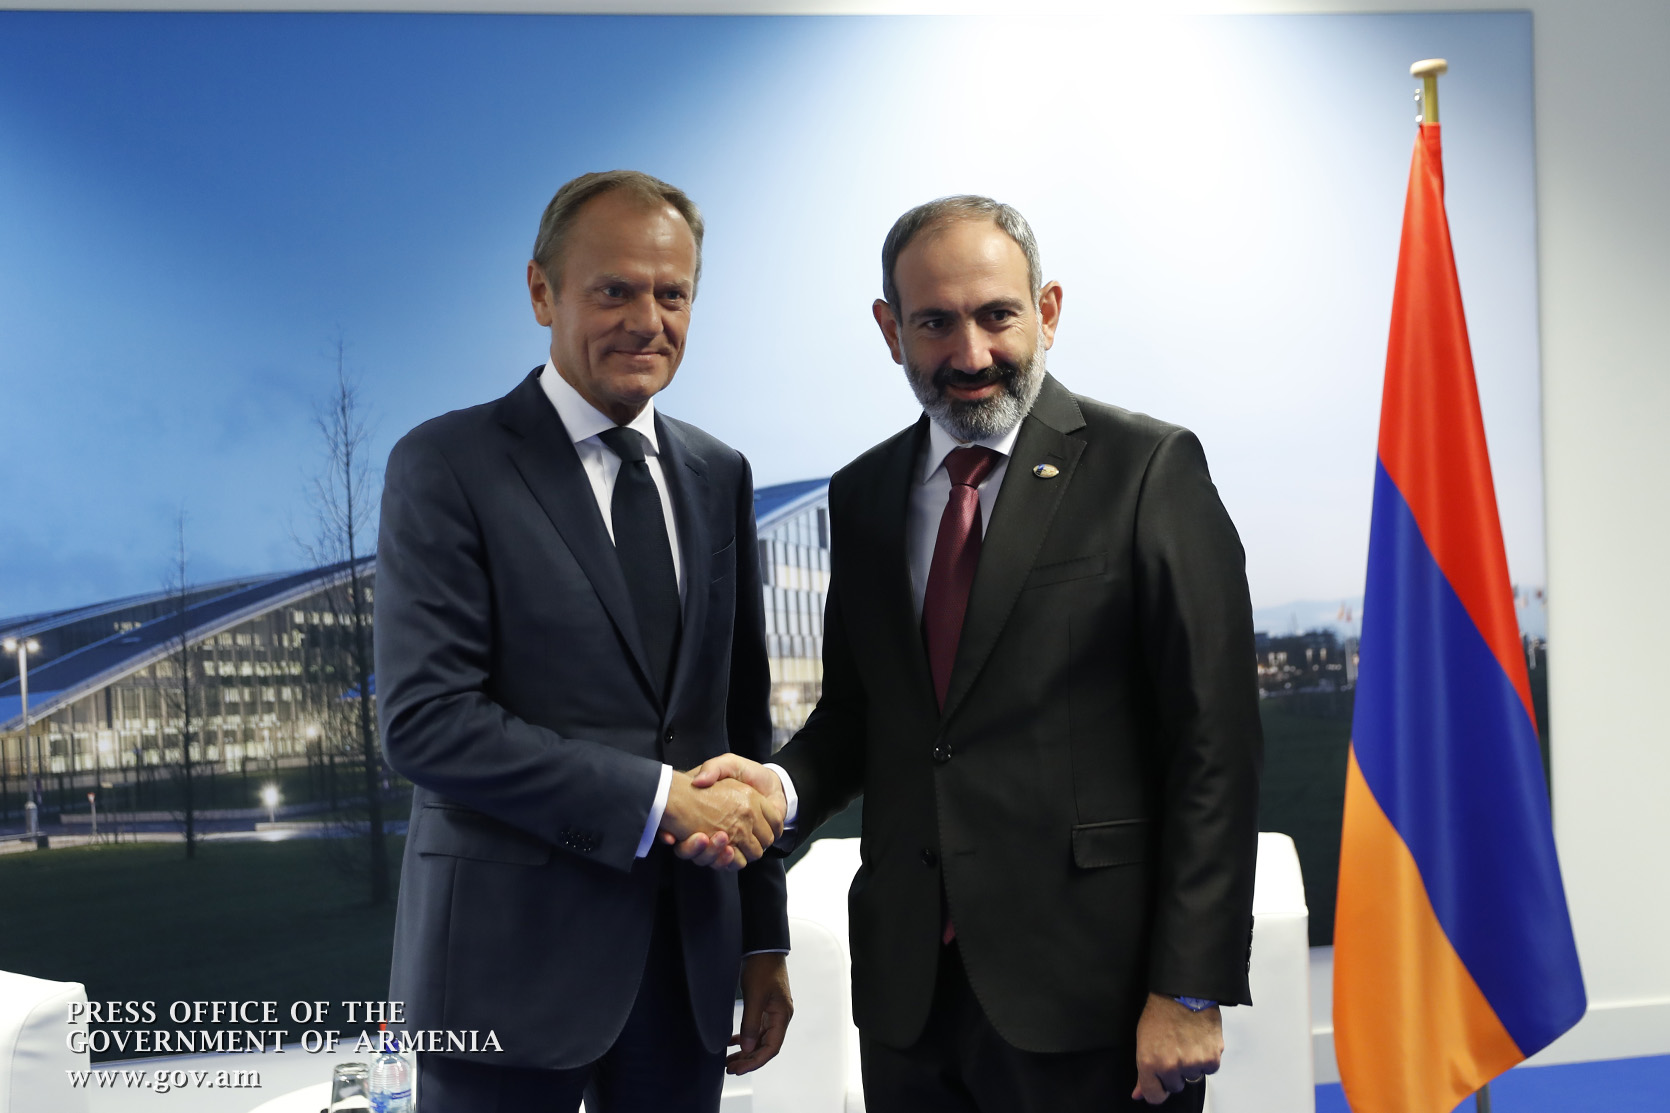 ‘You can rely on EU’s backing on the way to democratic reforms’ – Donald Tusk to Nikol Pashinyan